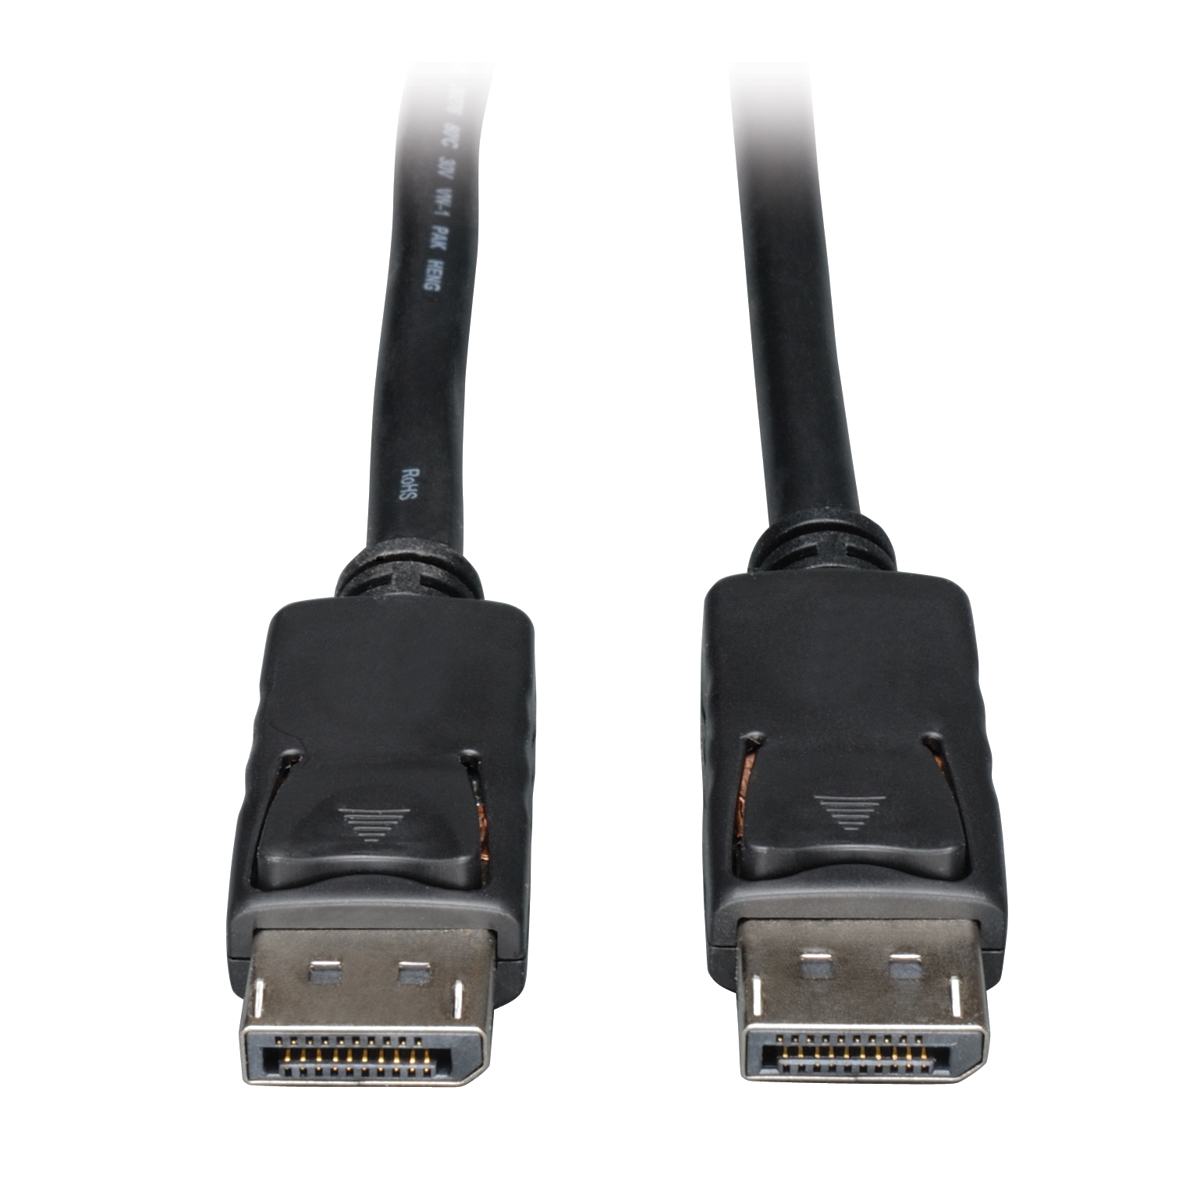 Photos - Cable (video, audio, USB) TrippLite Tripp Lite P580-006 6' DisplayPort Cable with Latches 